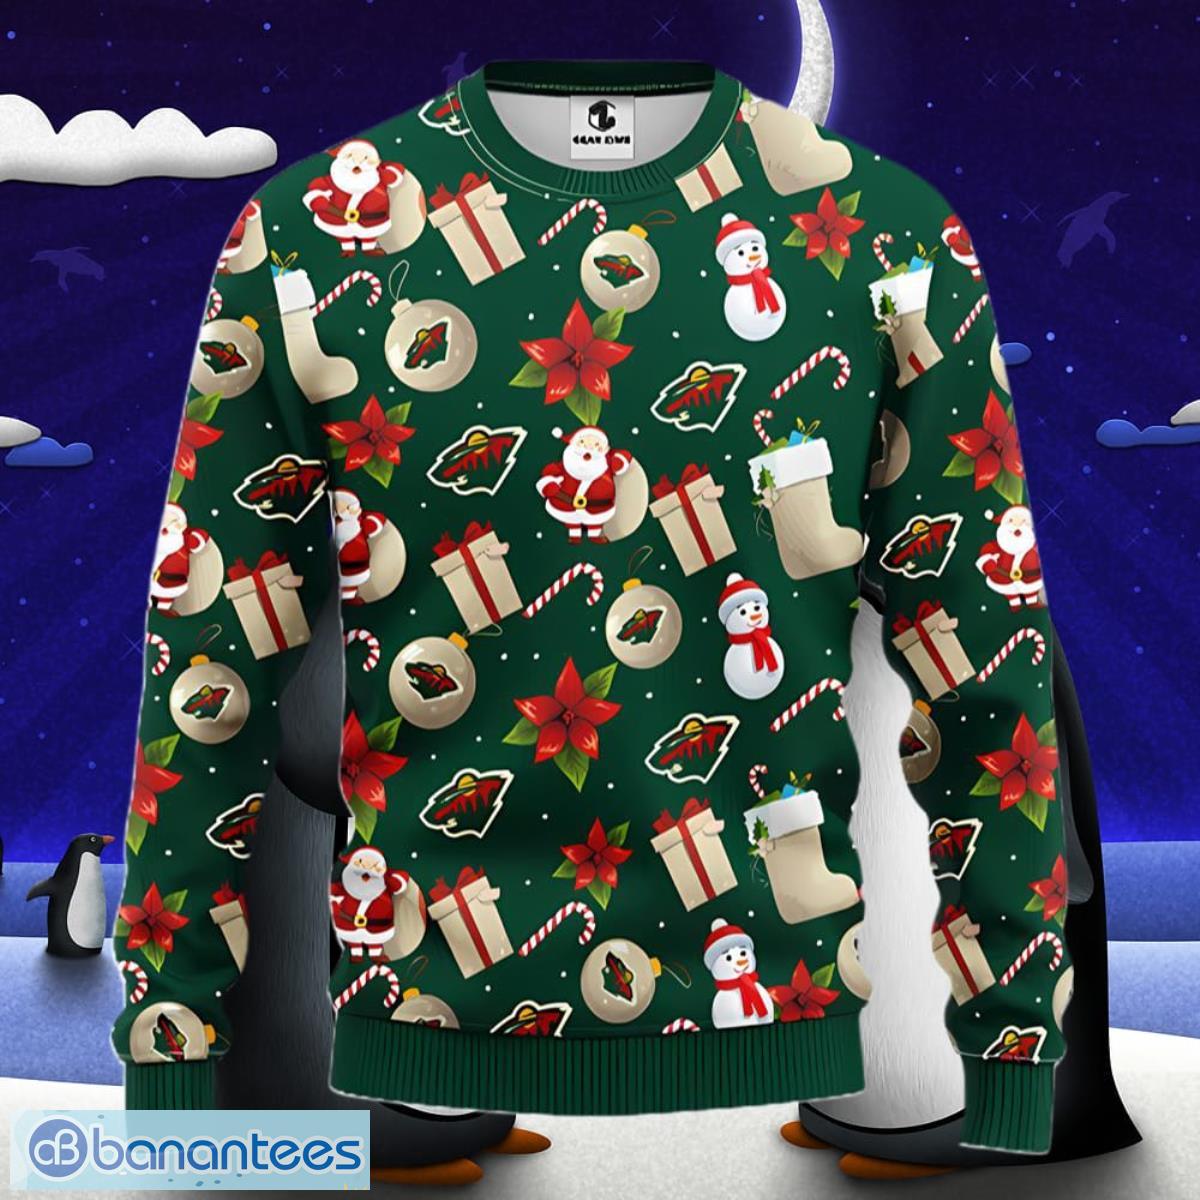 Minnesota Wild on X: Show us your best Ugly Christmas Sweater for